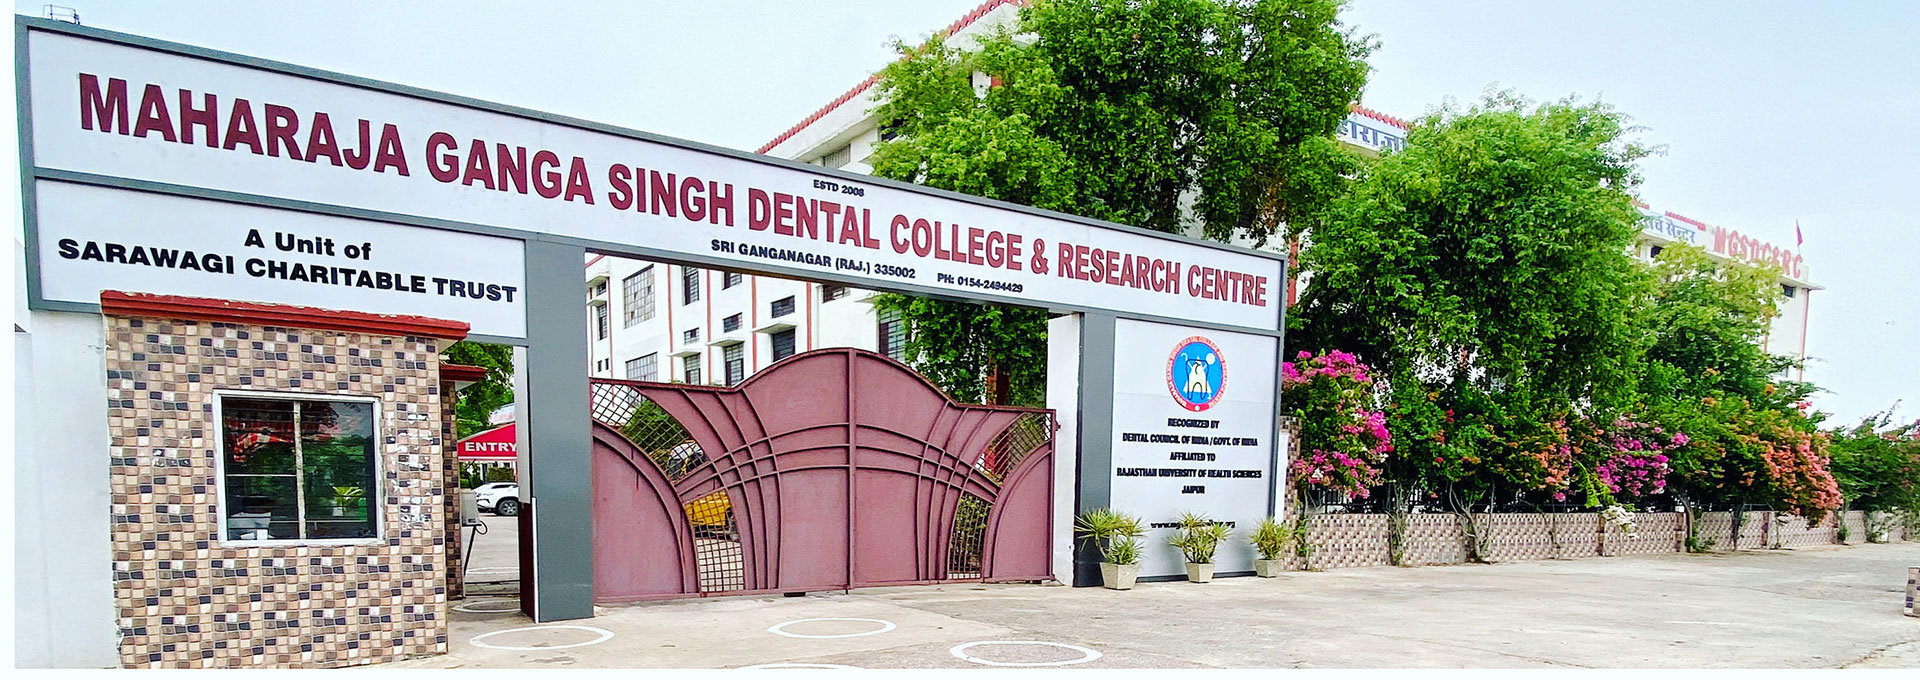 Maharaja Ganga Singh Dental College Sriganganagar Admission, Courses Offered, Fees structure, Placements, Facilities